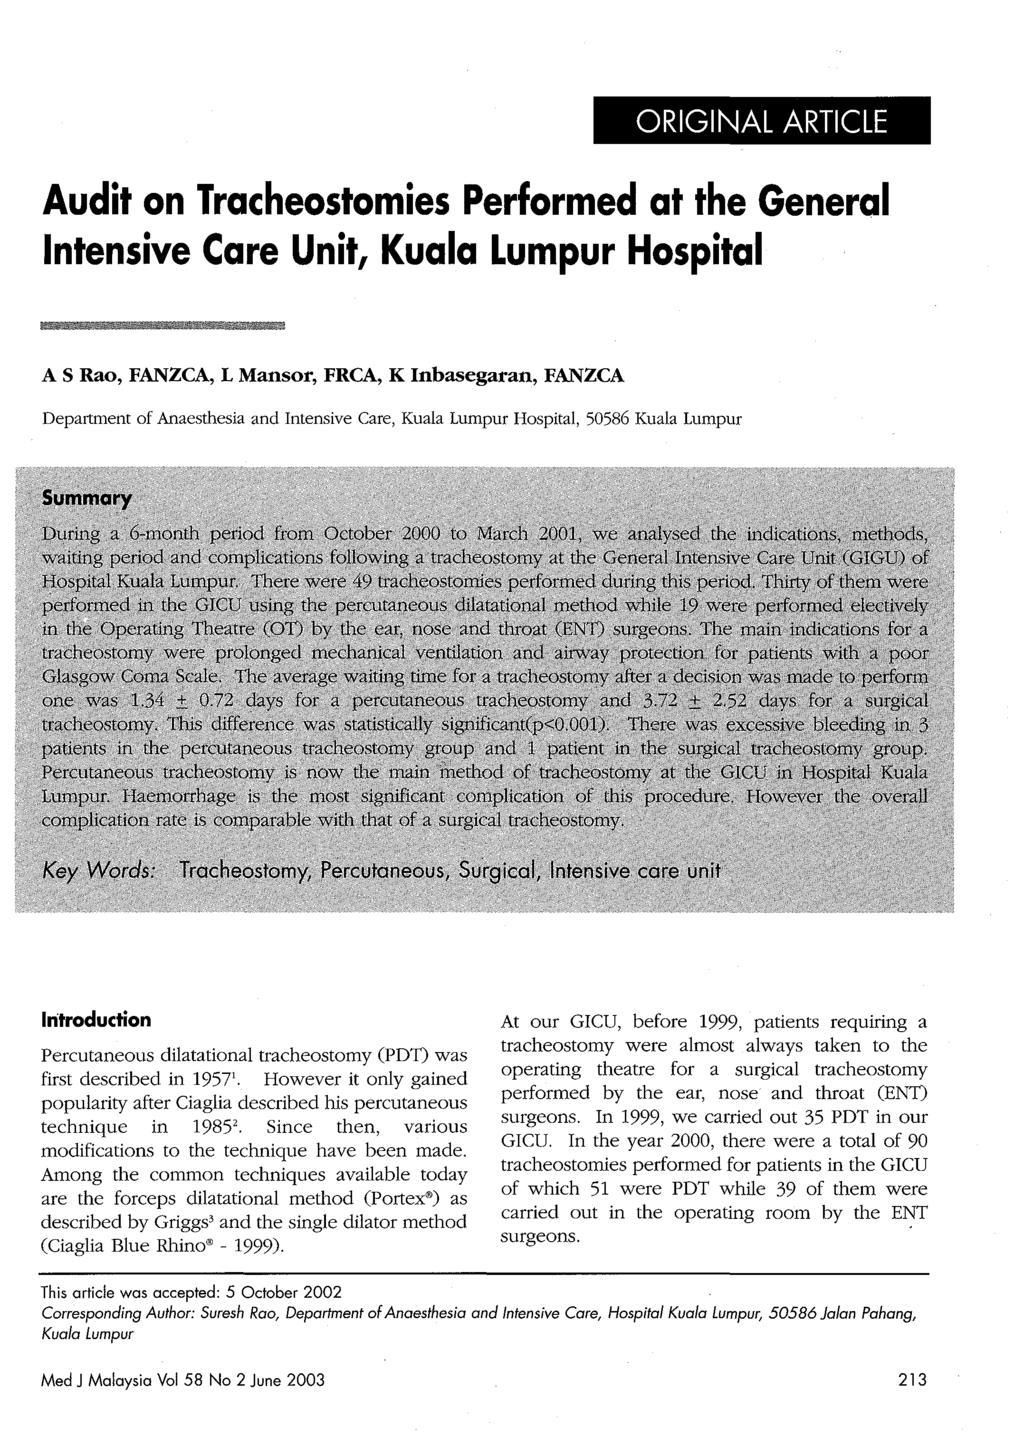 ORIGINAL ARTICLE Audit on Tracheostomies Performed at the General Intensive Care Unitt Kuala Lumpur Hospital A S Rao, FANZCA, L Mansor, FRCA, K Inbasegaran, FANZCA Department of Anaesthesia and